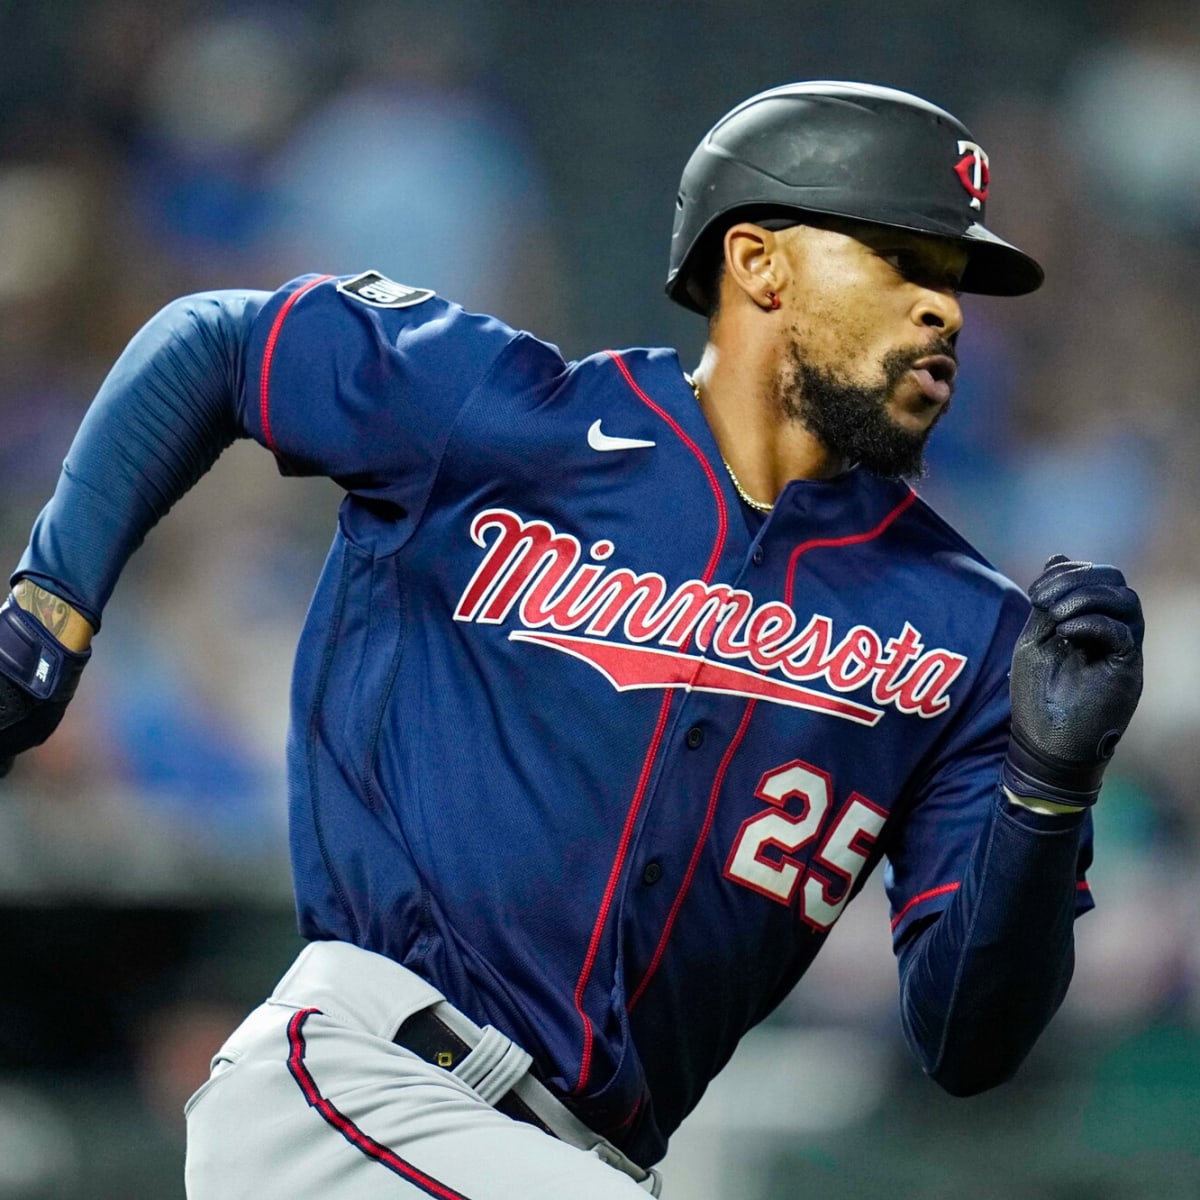 Byron Buxton leads off, Max Kepler on the bench as Twins face